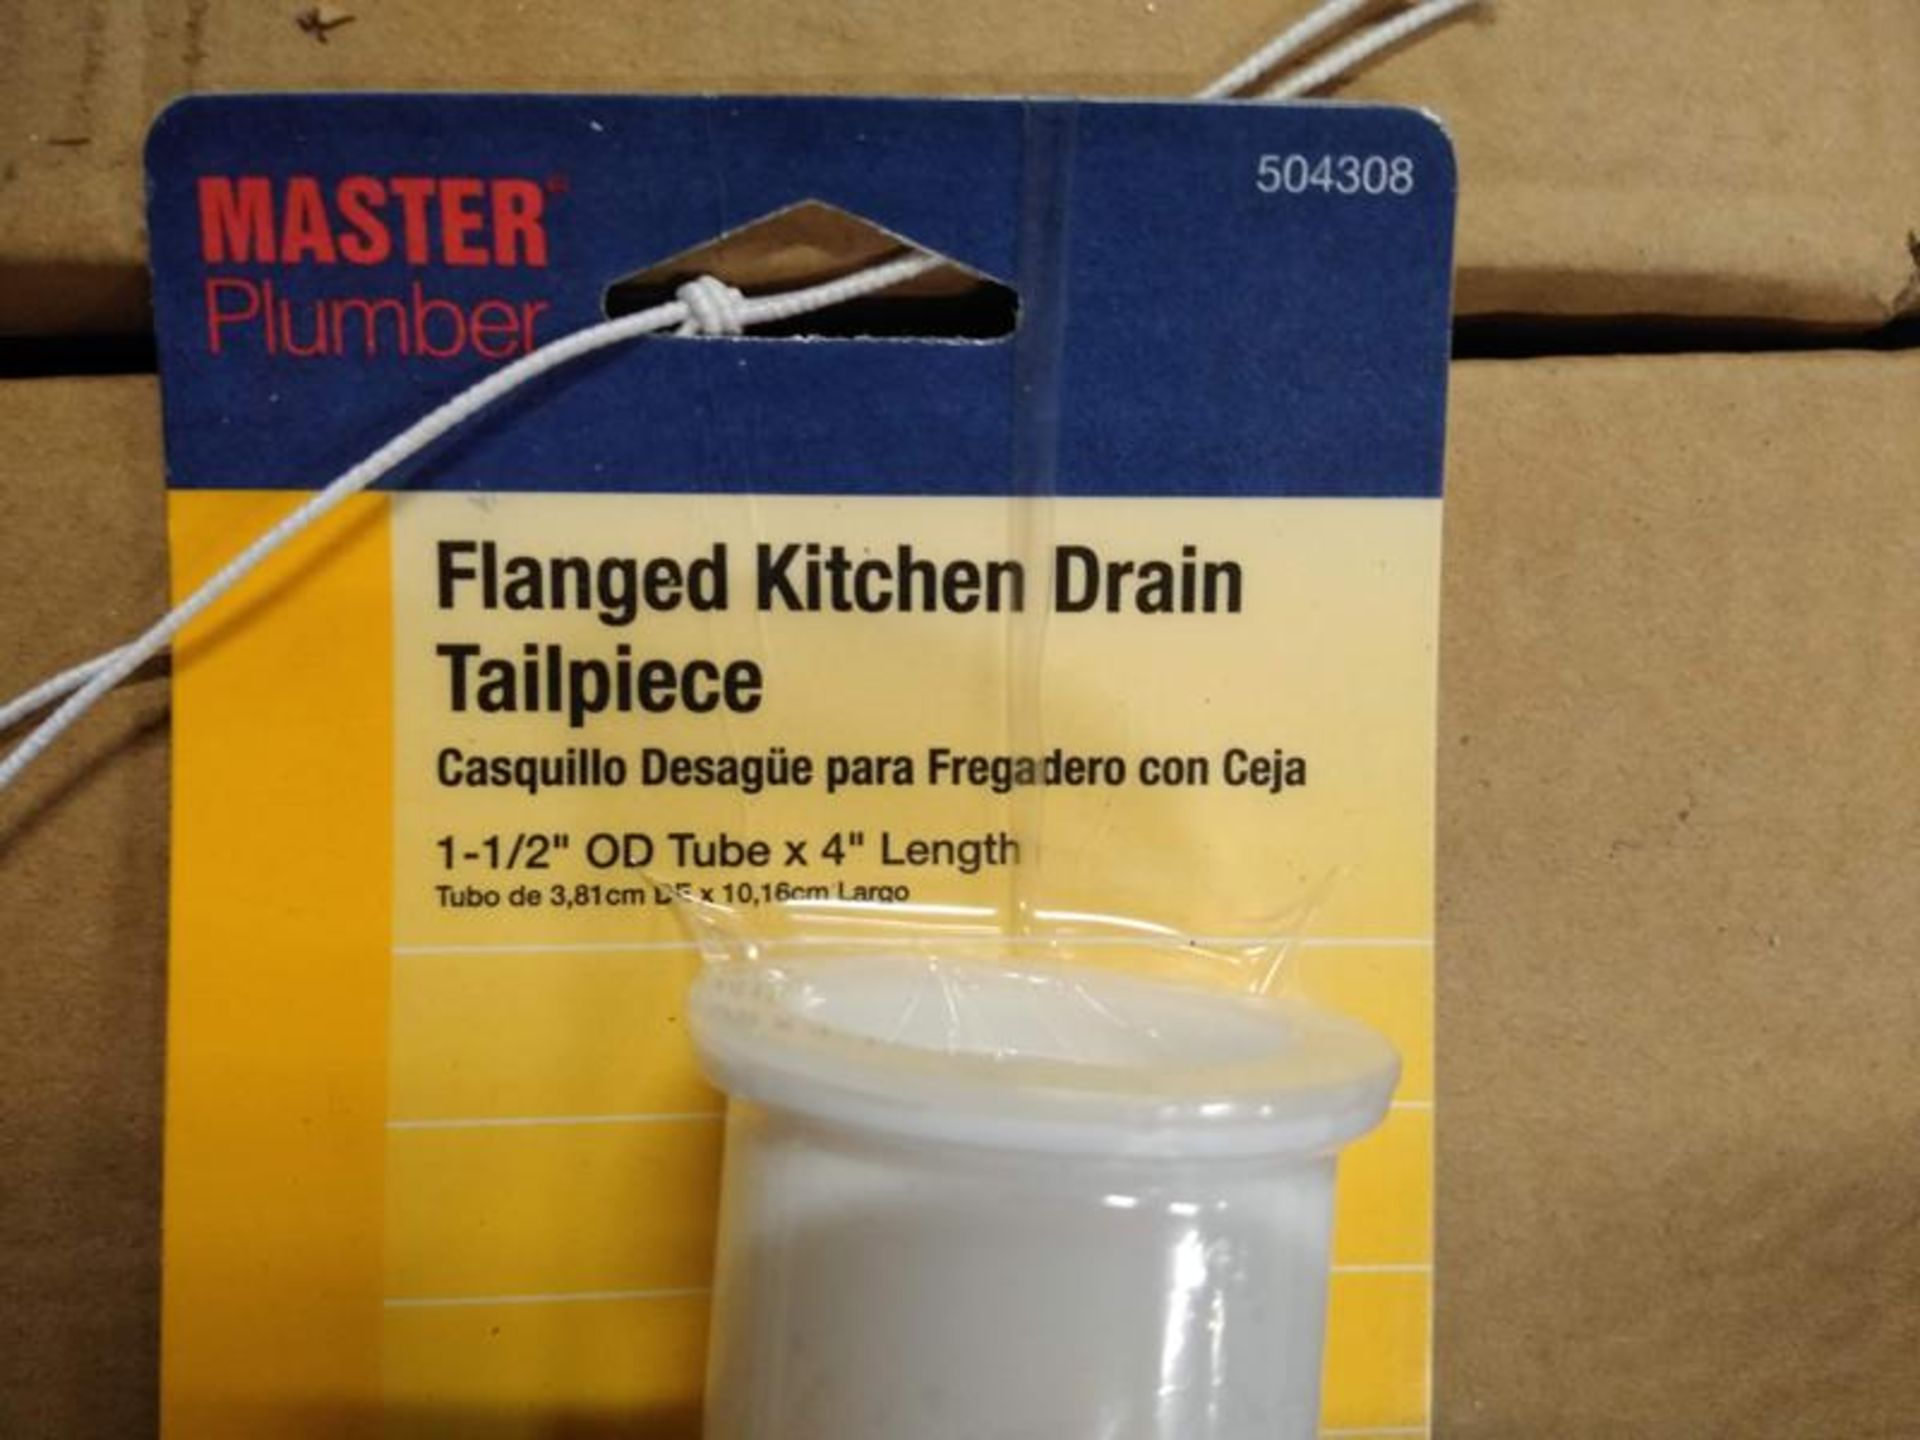 LOT OF 105 MASTER PLUMBER FLANGED KITCHEN DRAIN TAILPIECES - Image 3 of 6